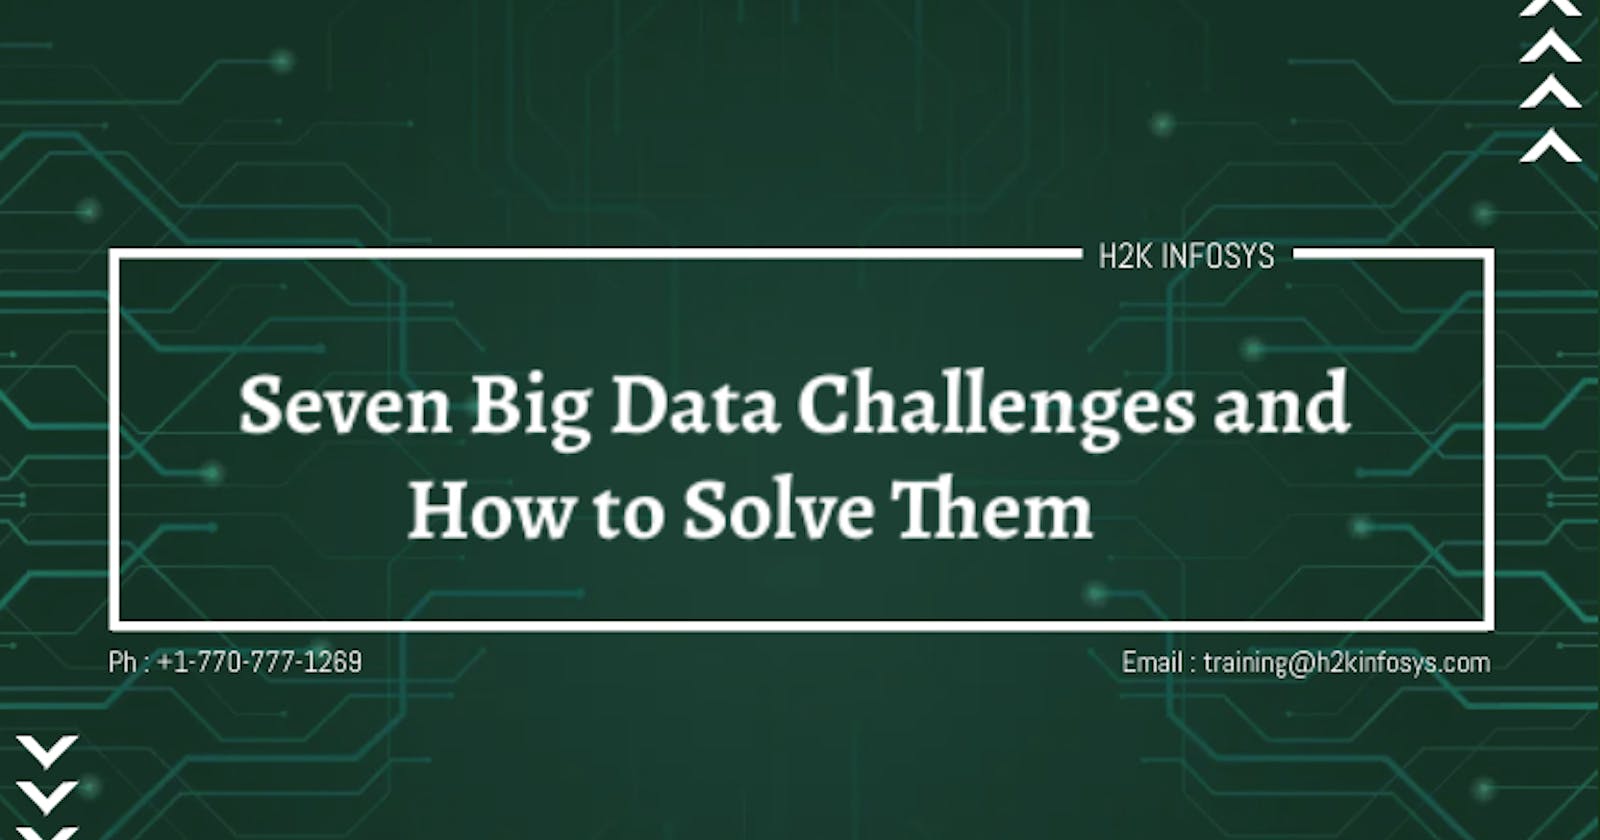 Seven Big Data Challenges and How to Solve Them